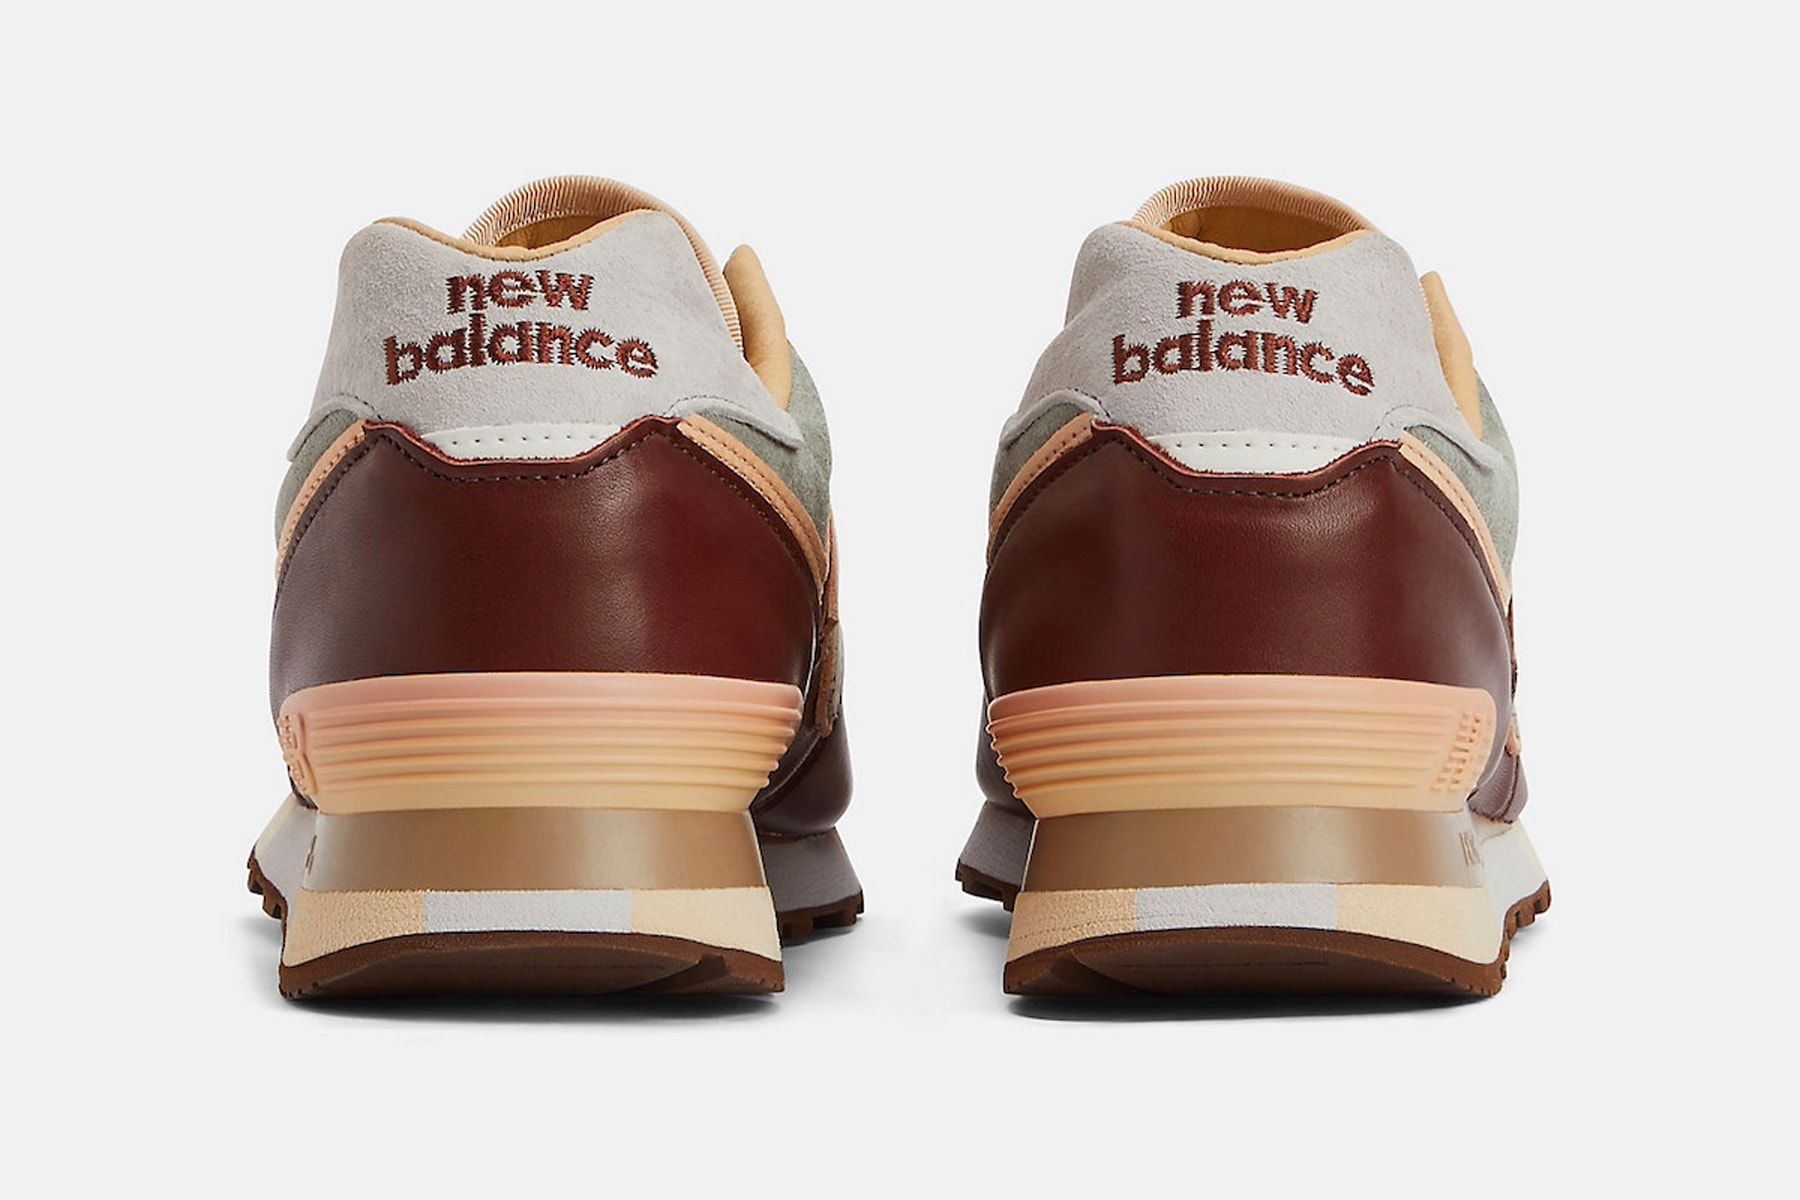 the Apartment x New Balance 576 Made in UK 全新聯名鞋款台灣發售情報公開